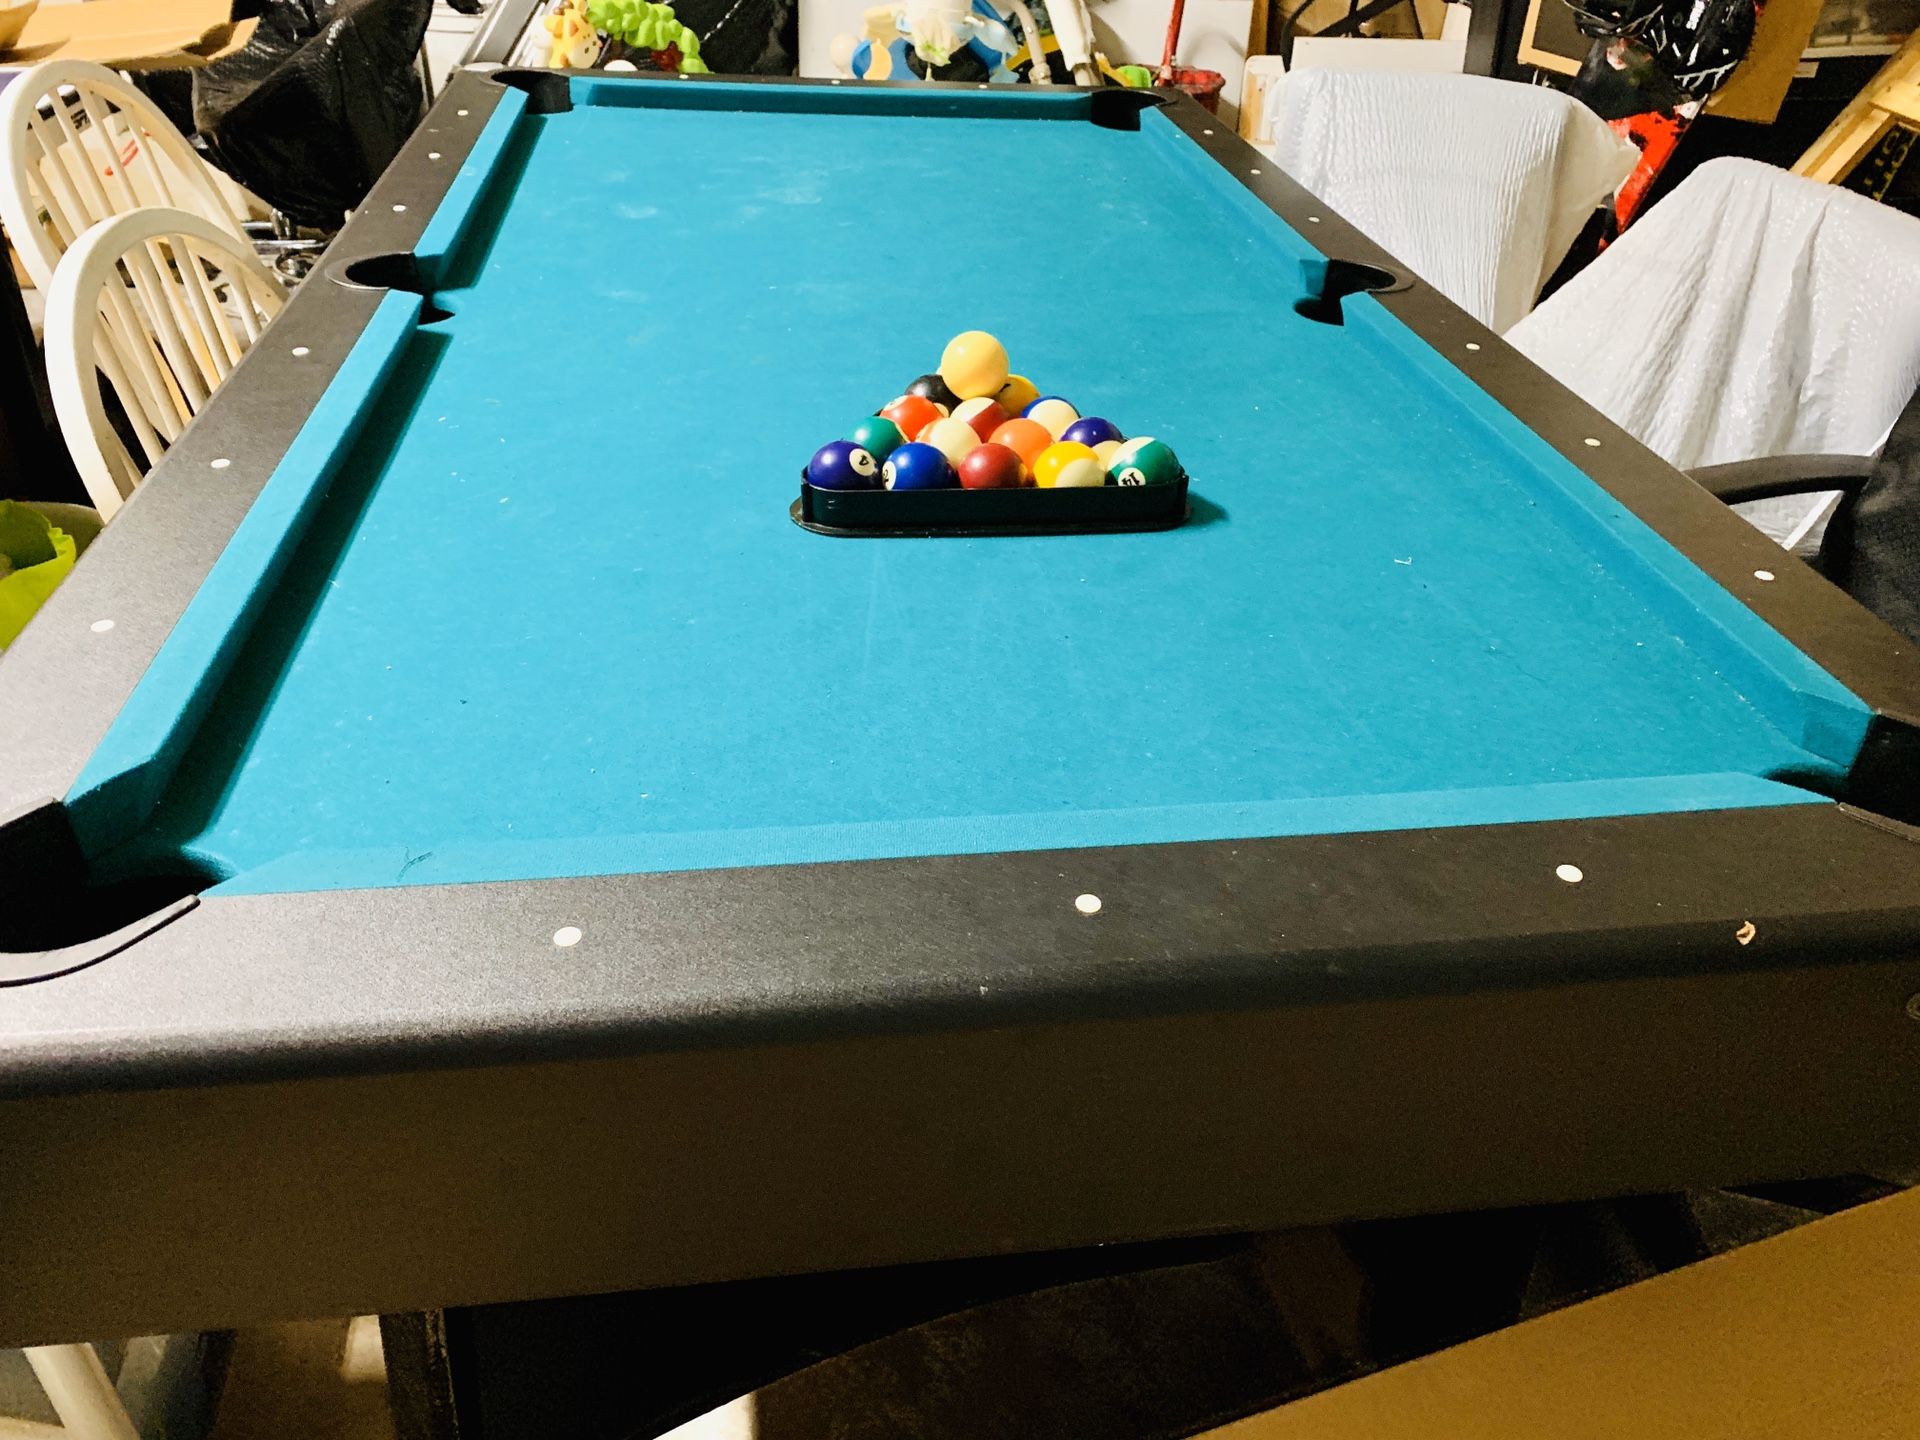 Pool Table for Sale - $60